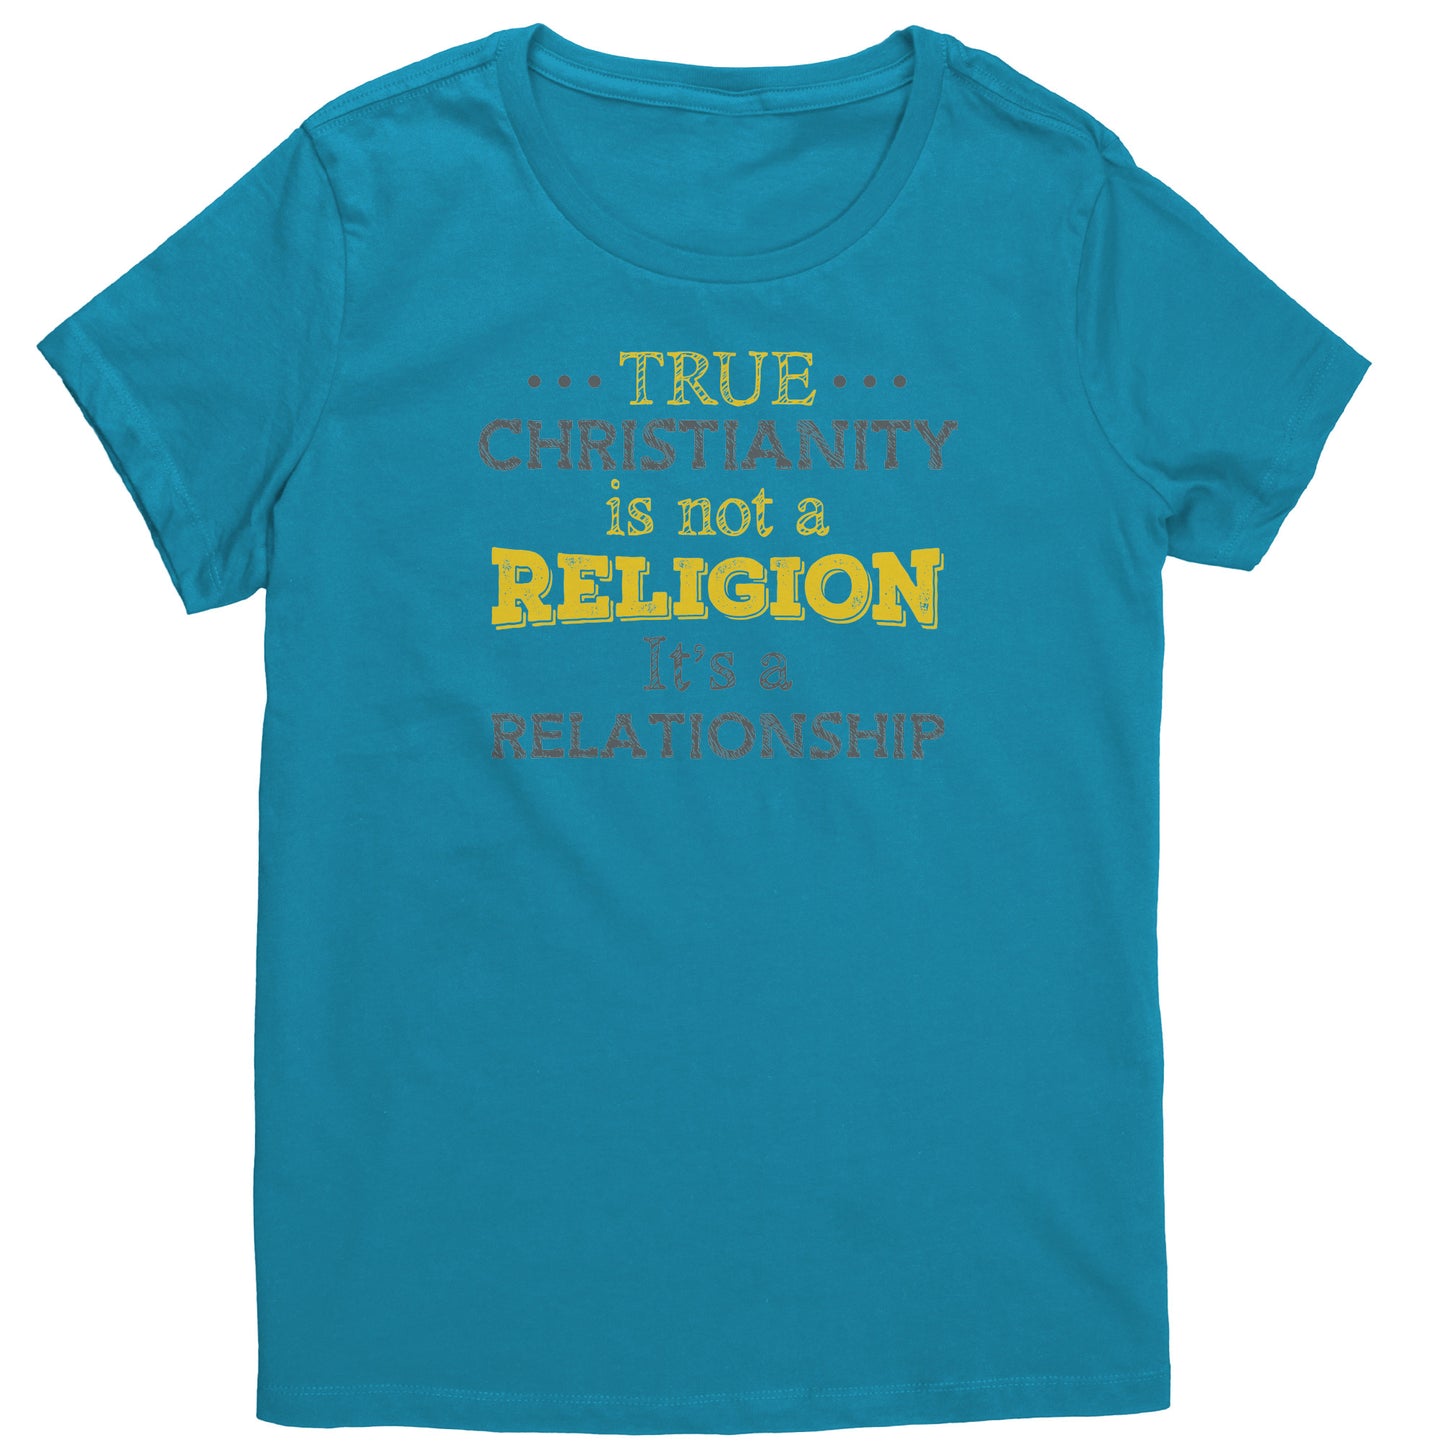 True Christianity Is Not A Religion But A Relationship Women's T-Shirt Part 2